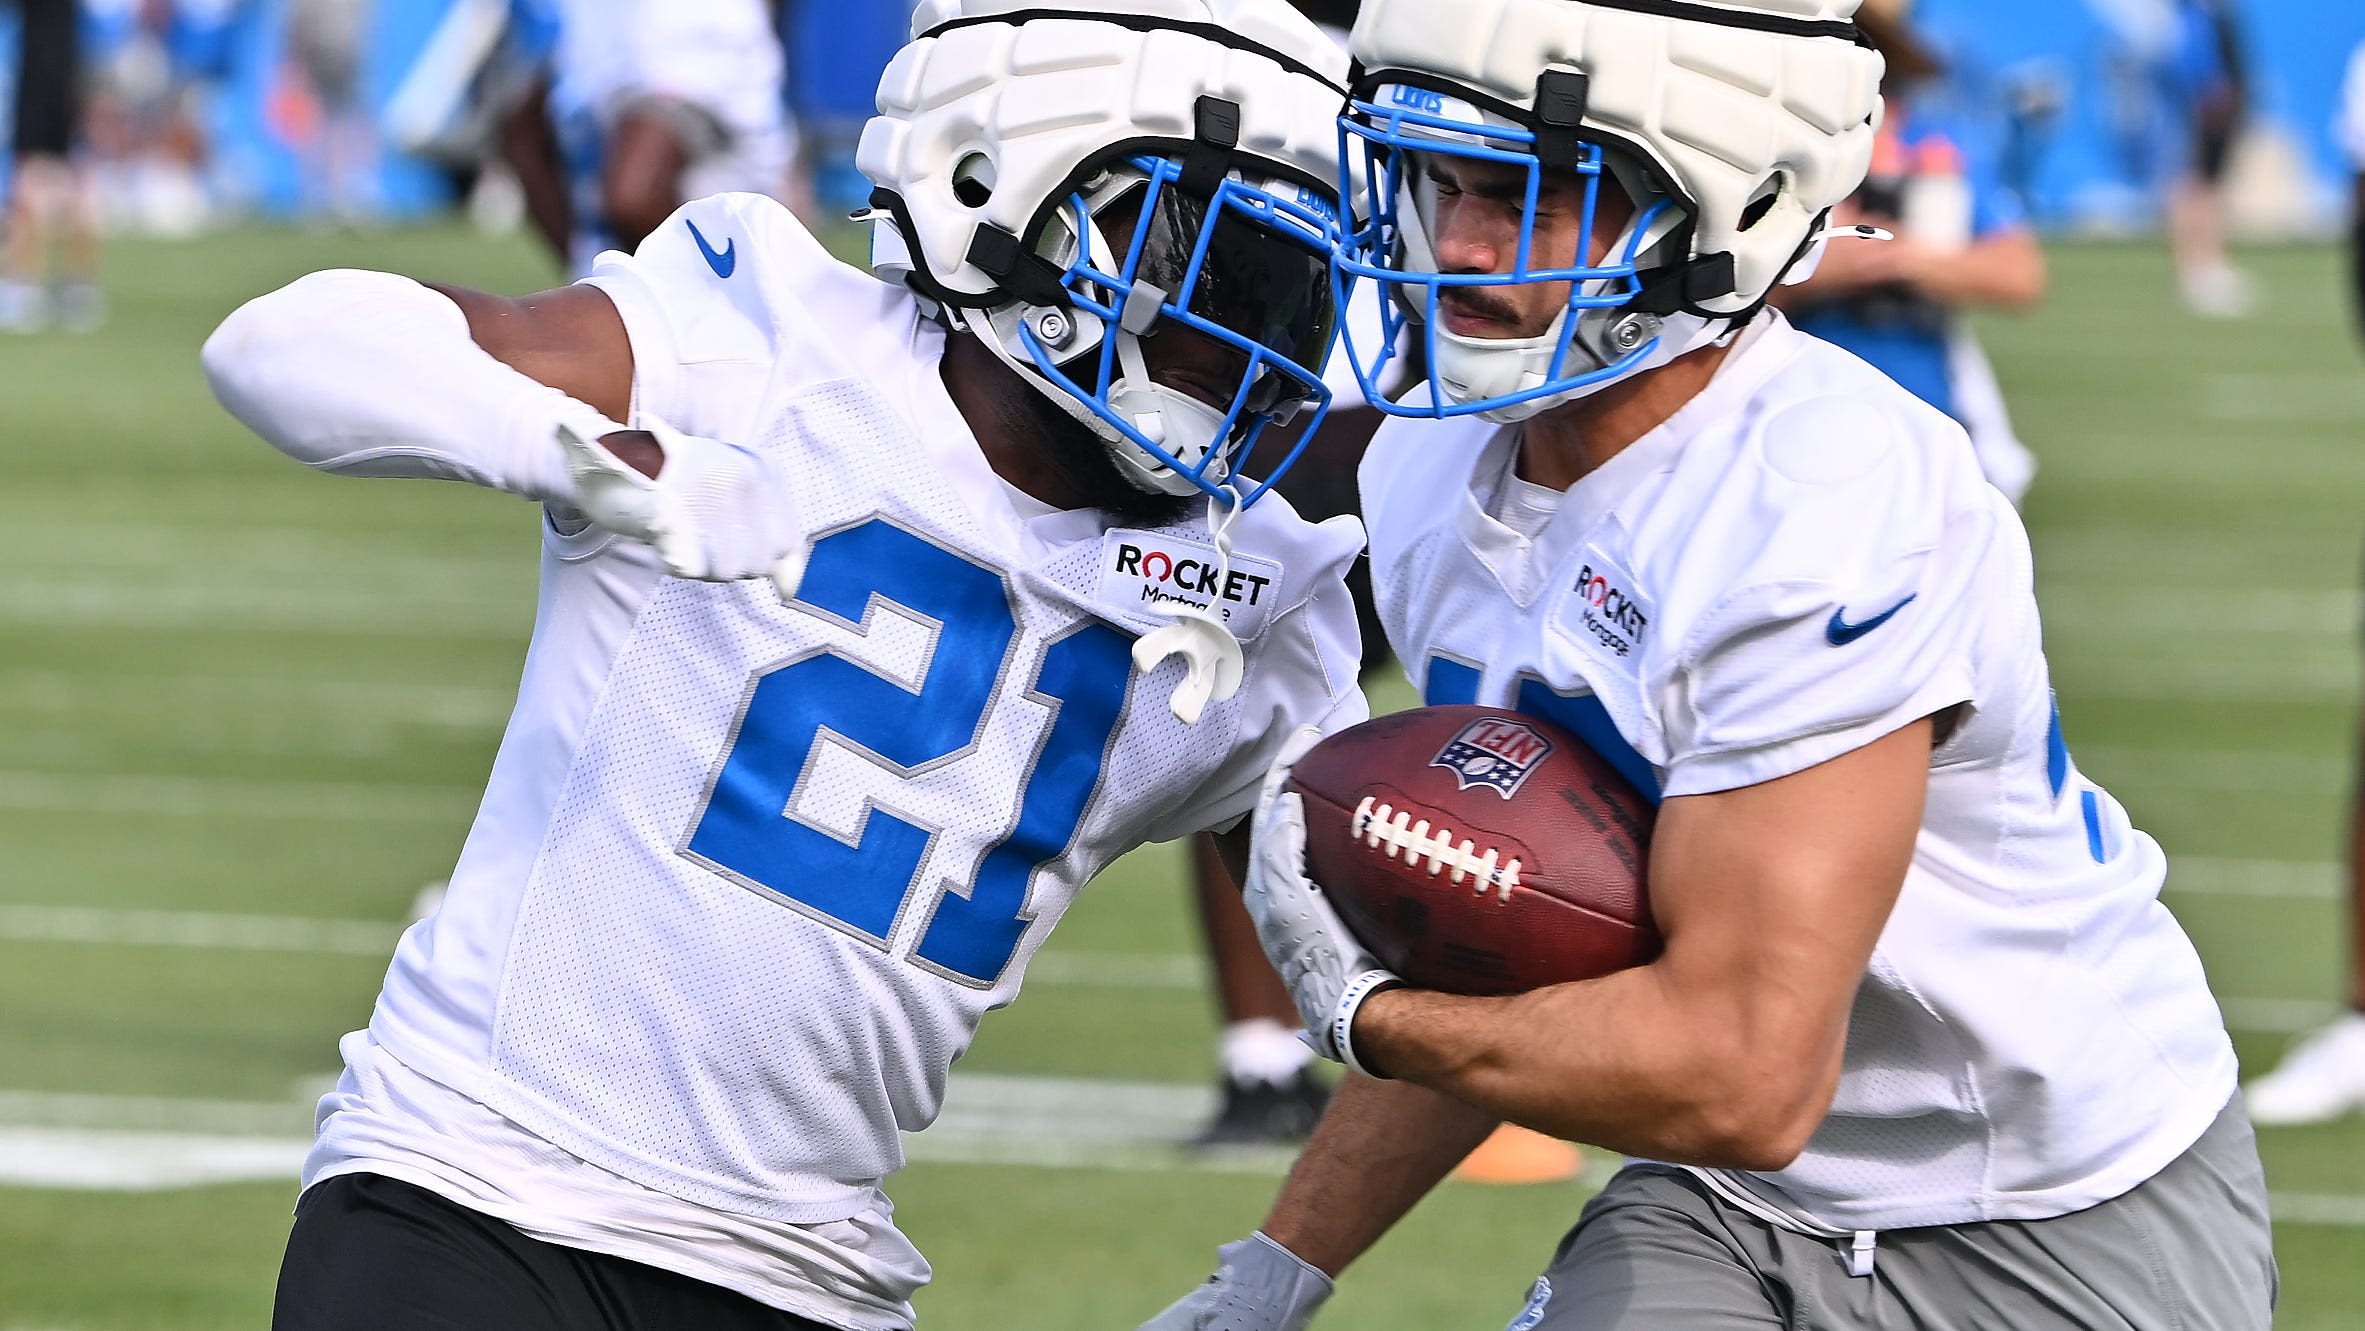 'Iron sharpens iron': Stacked Lions roster only helping teammates improve